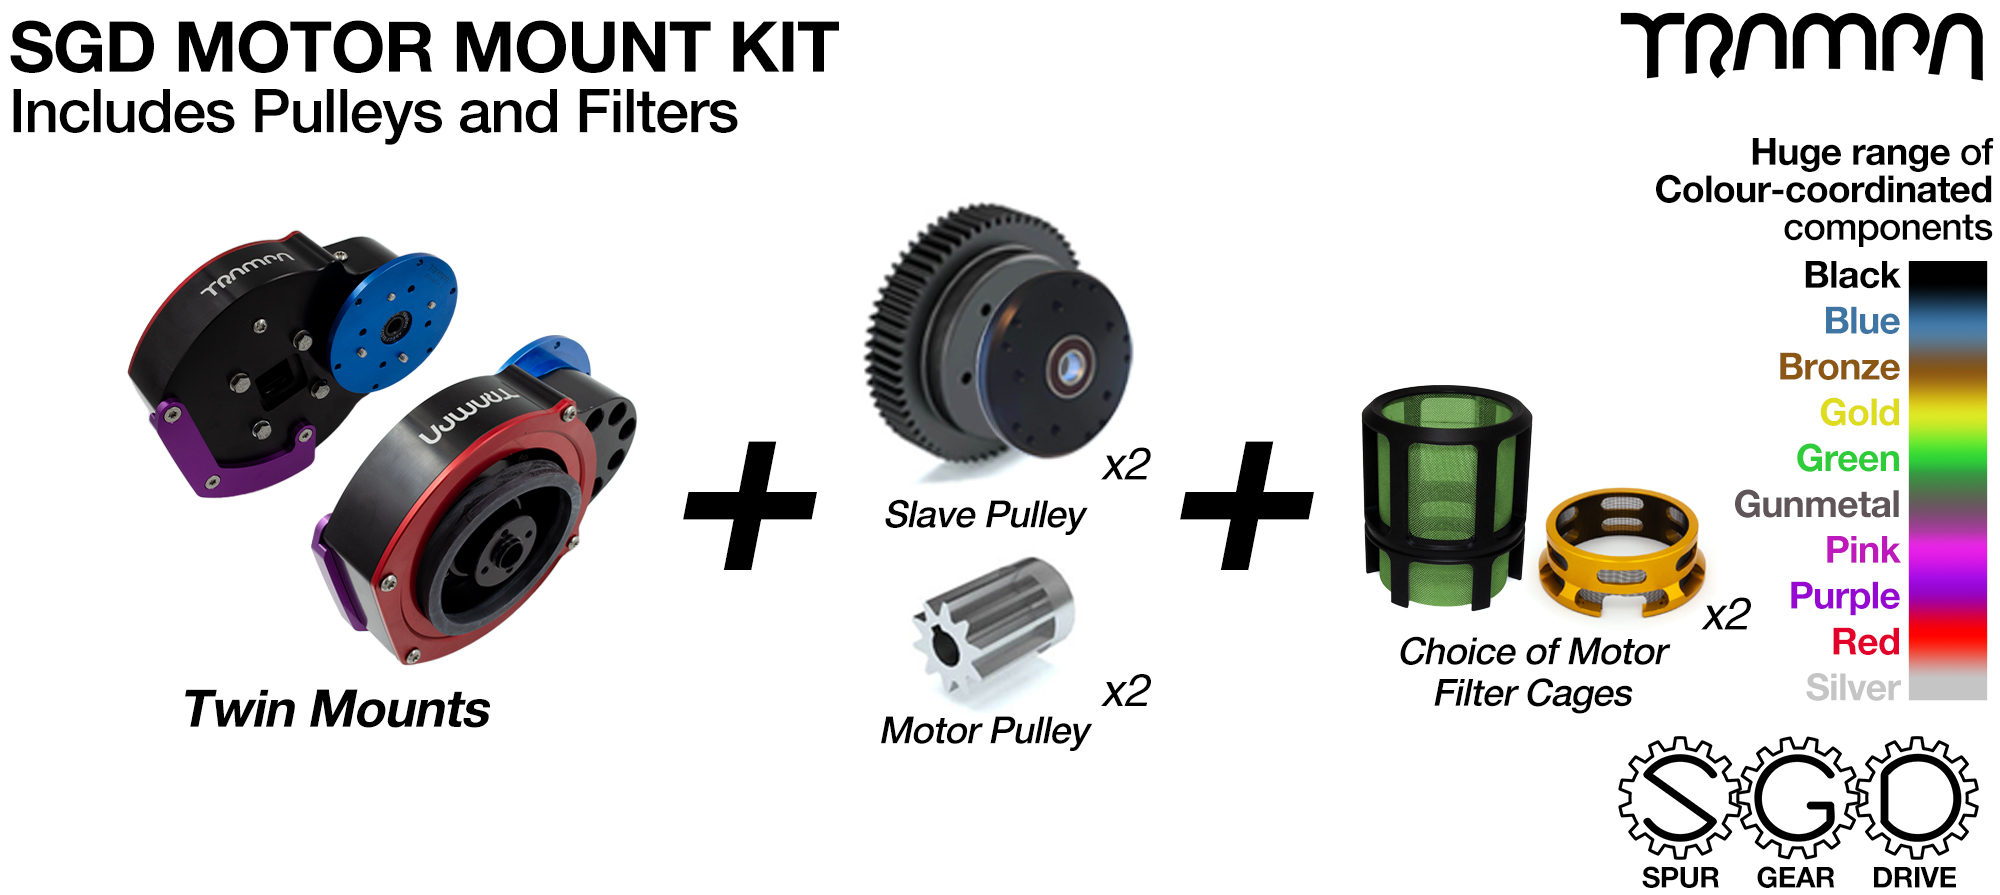 SGD 2WD Motor Mount with PULLEYS & FILTERS - NO Motors - Drift-E-Trike